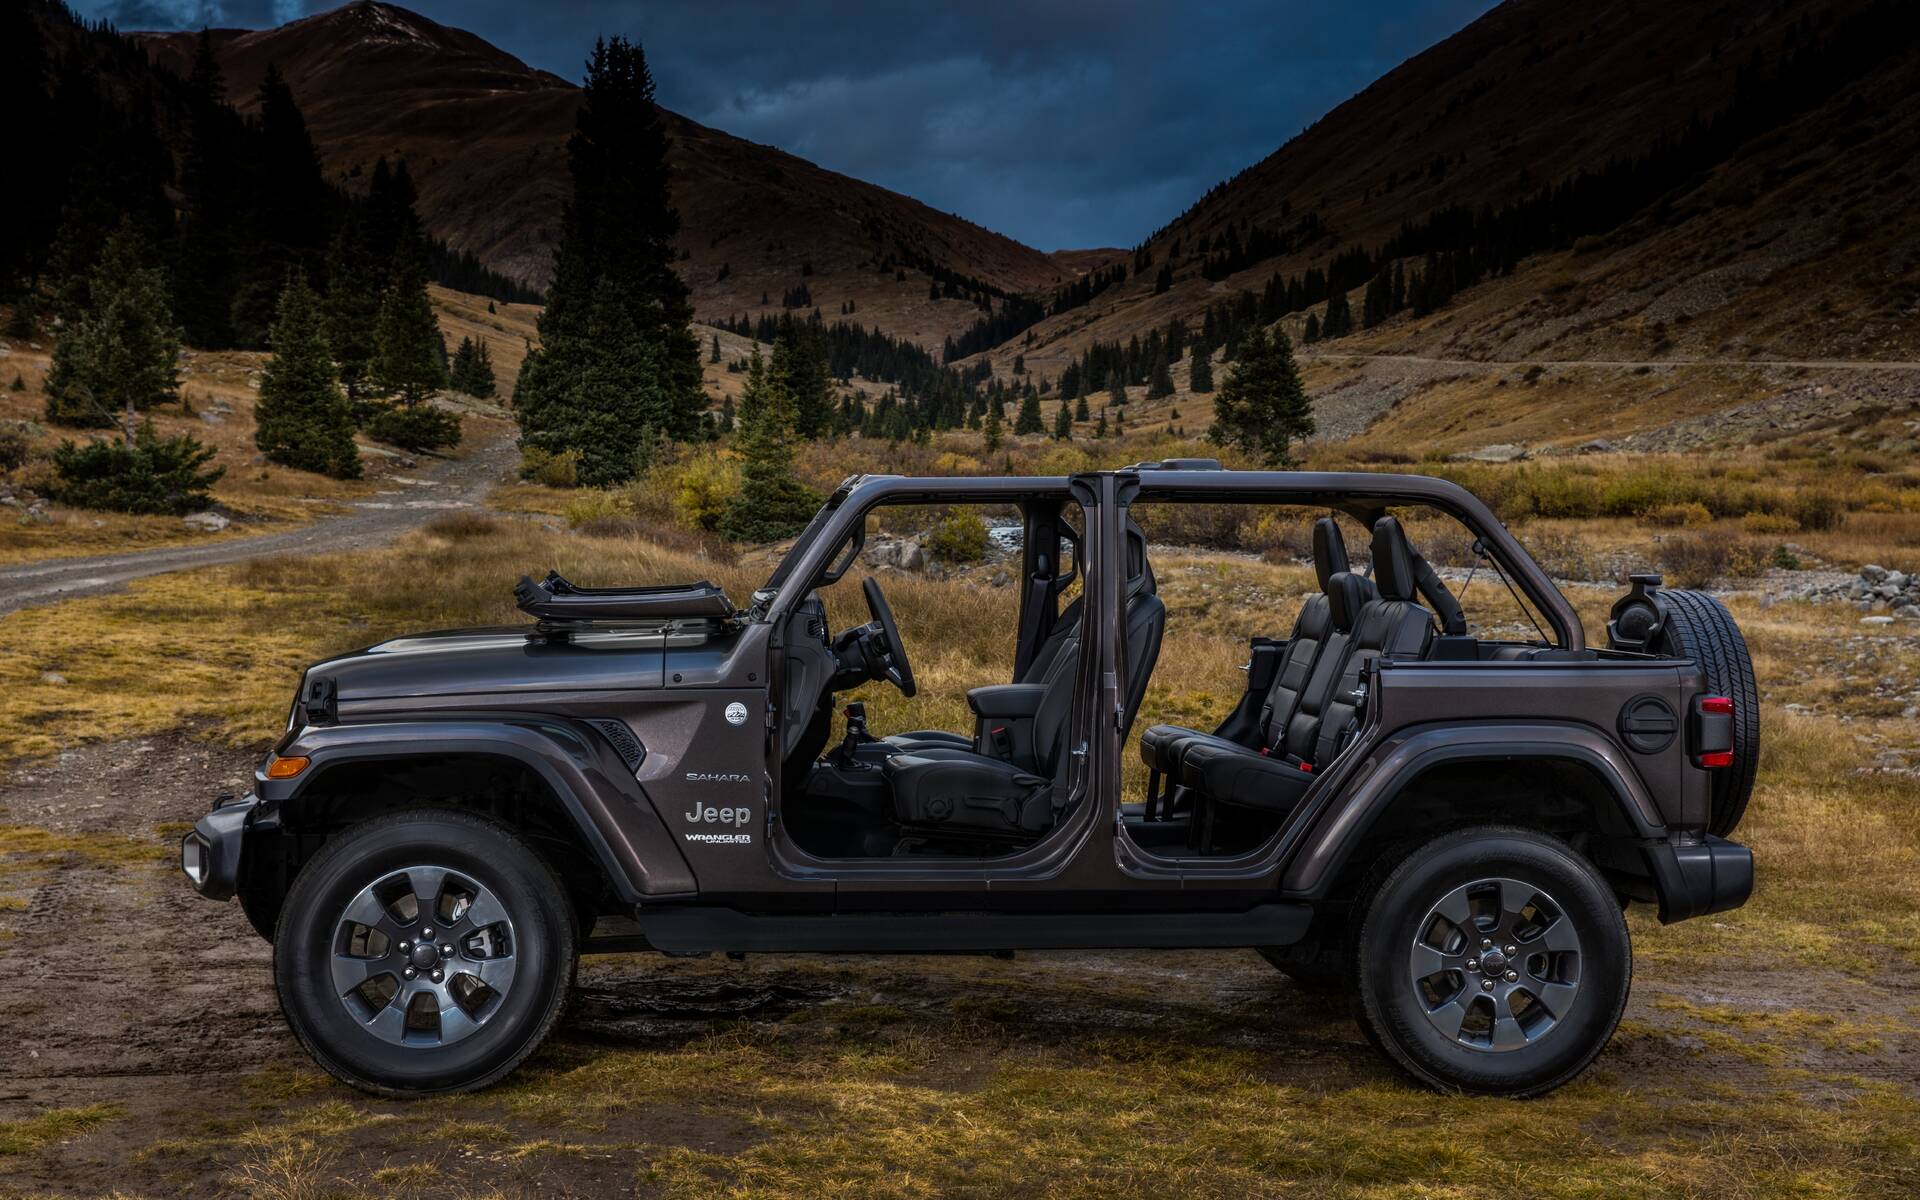 How Do Removable Doors Work On the Jeep Wrangler? - The Car Guide